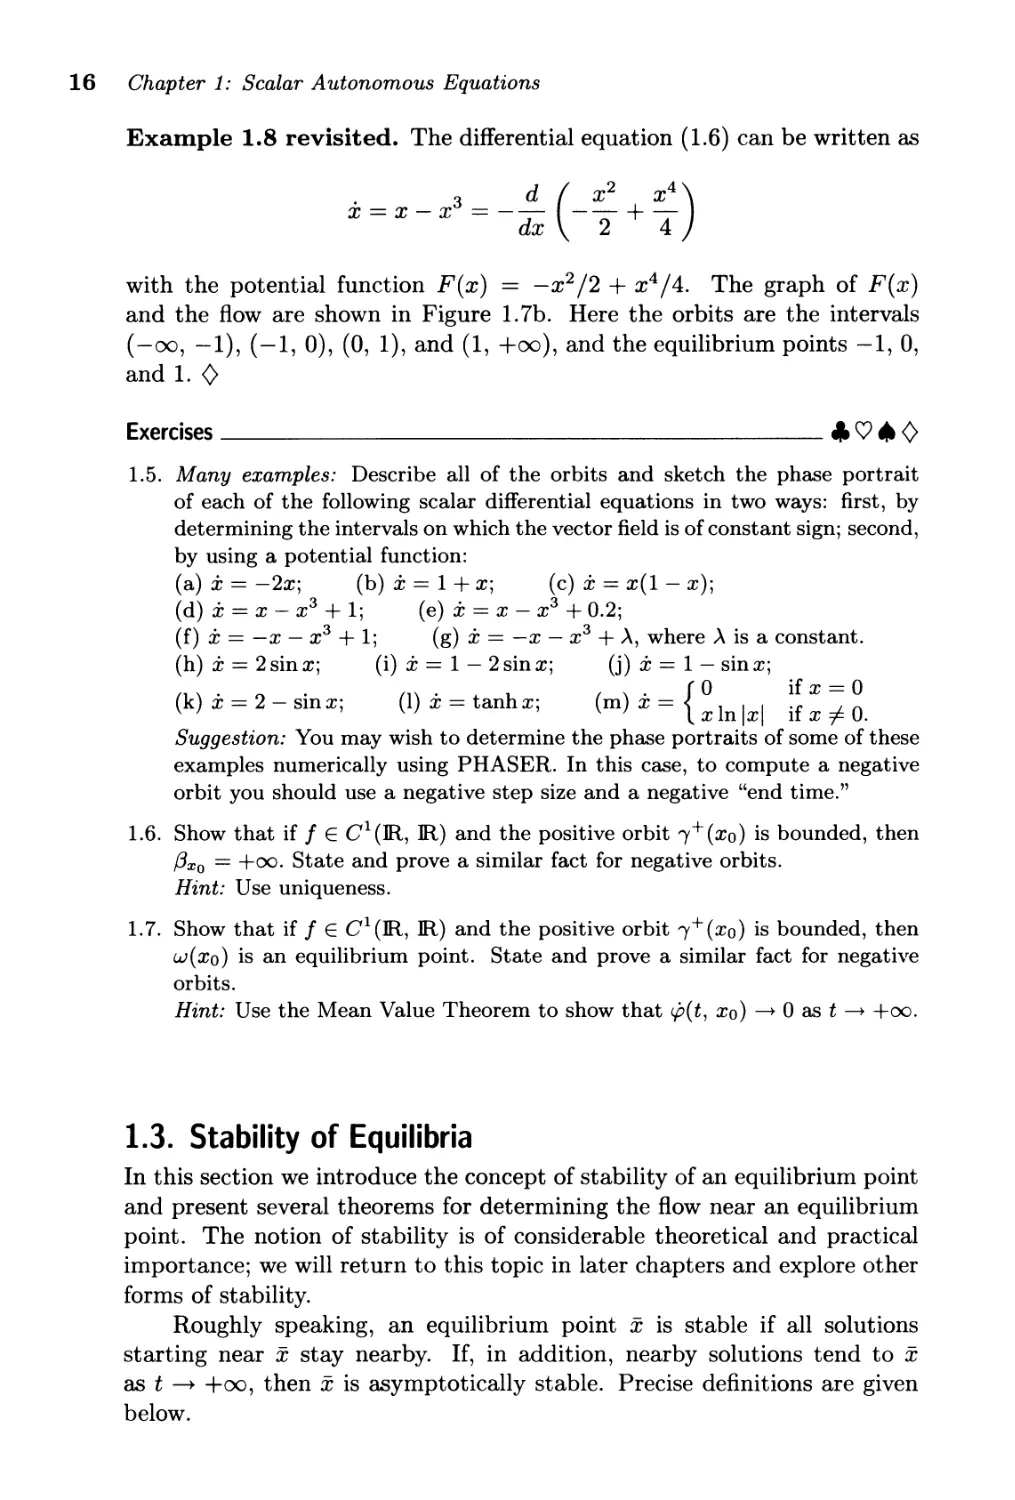 1.3. Stability of Equilibria